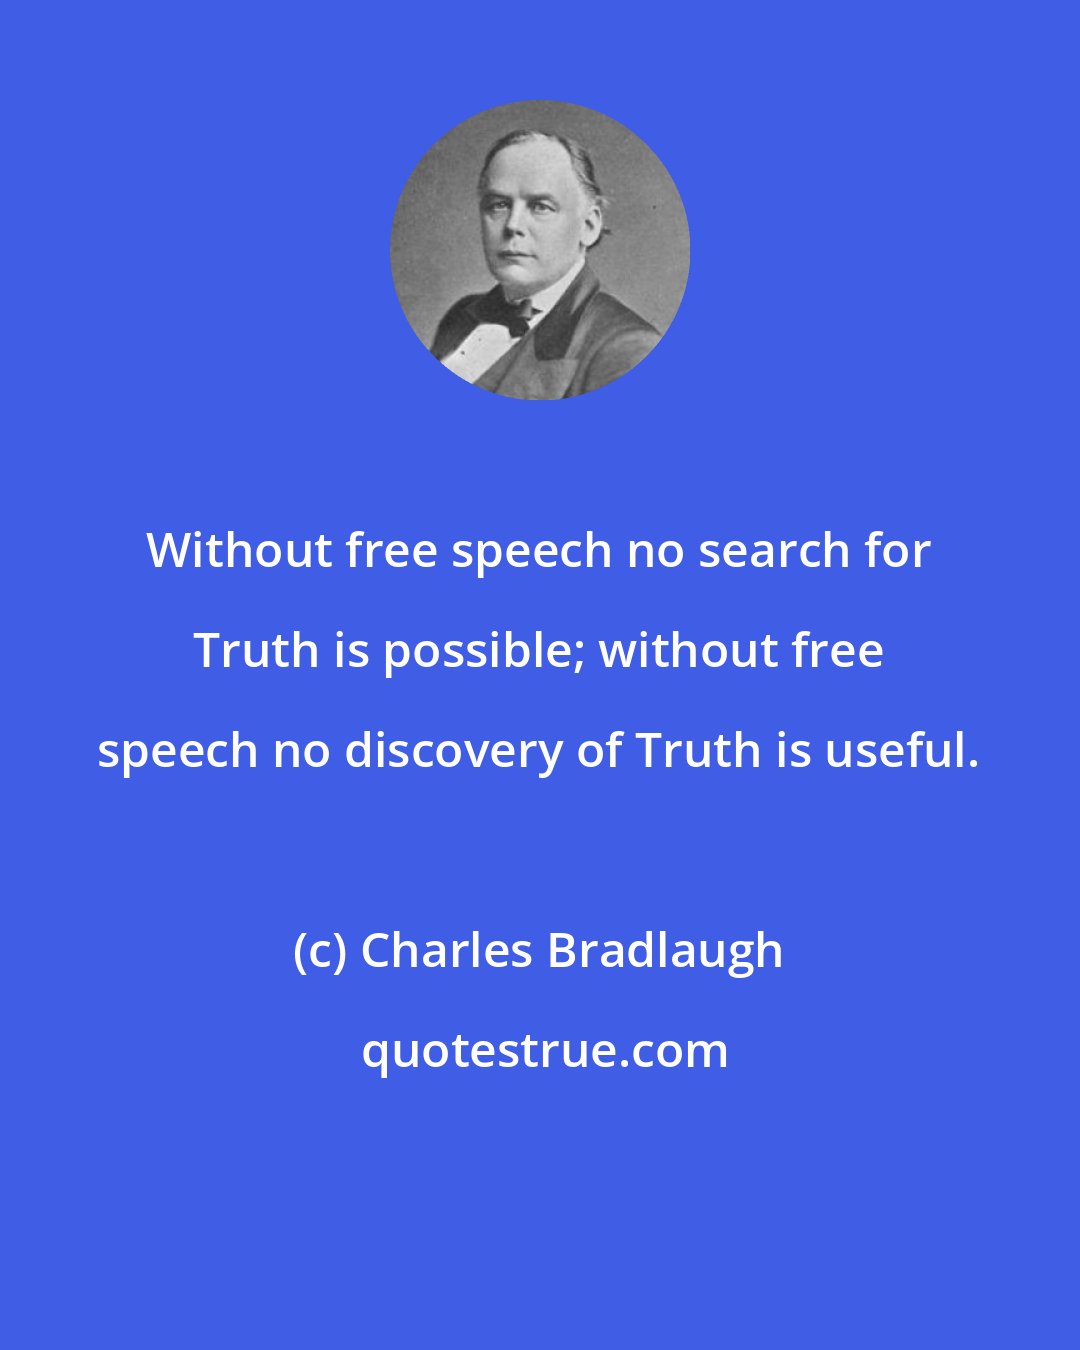 Charles Bradlaugh: Without free speech no search for Truth is possible; without free speech no discovery of Truth is useful.